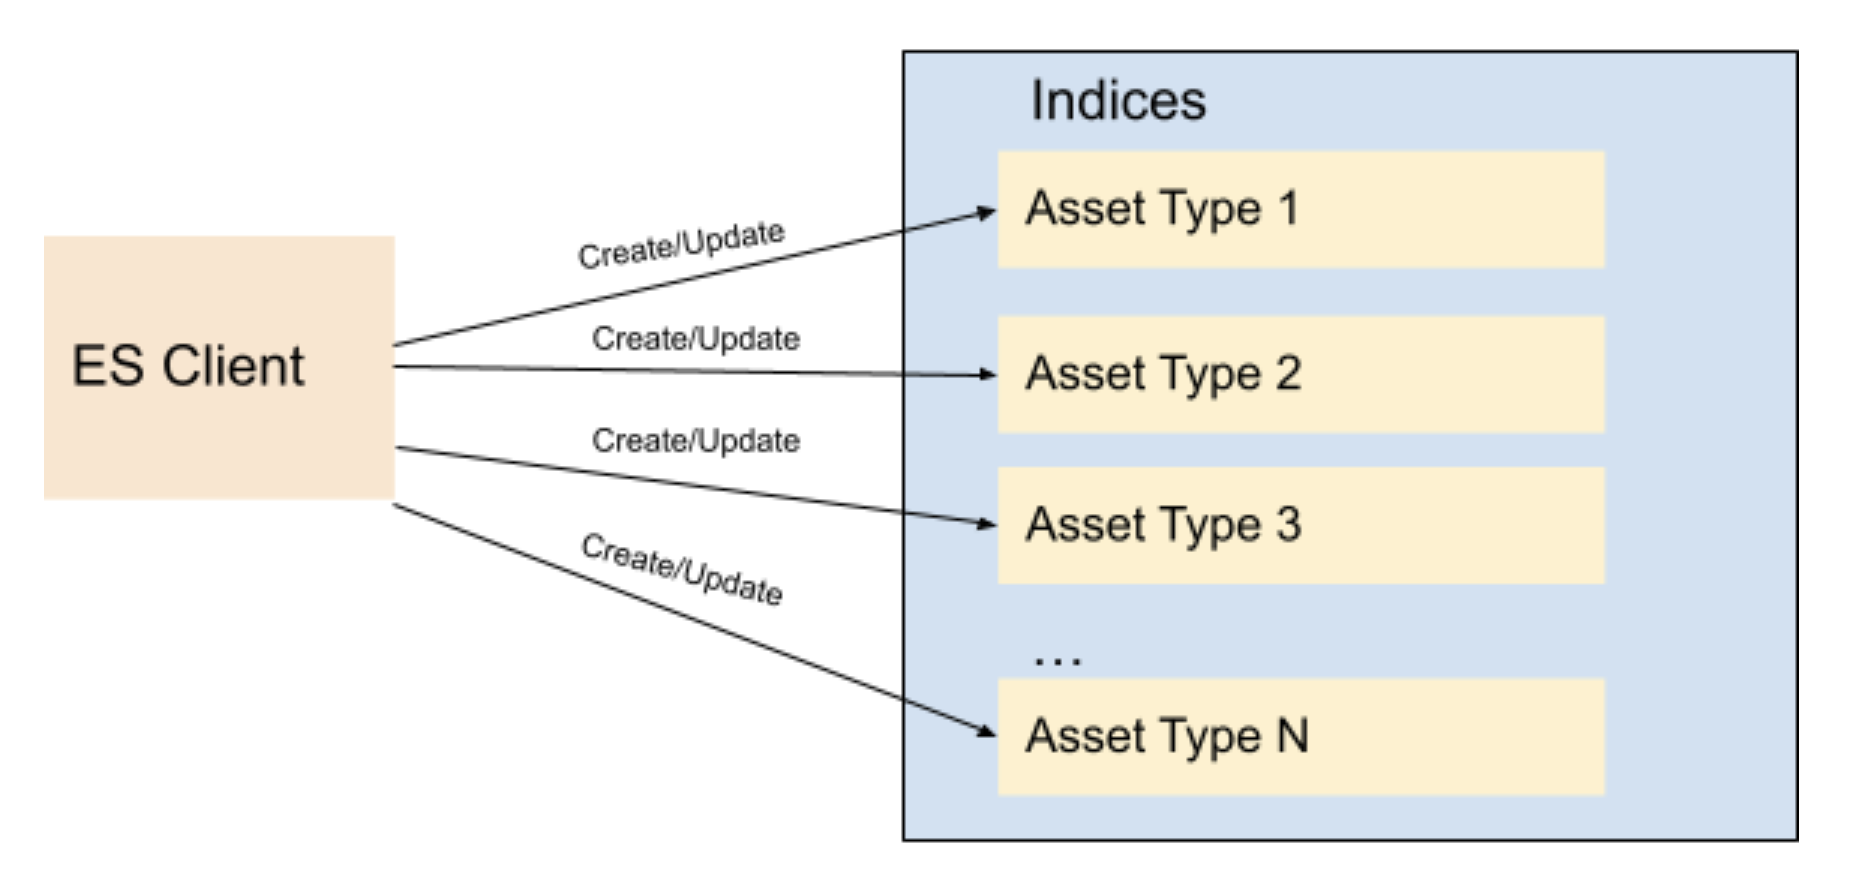 Fig 1. Indices based on Asset Types